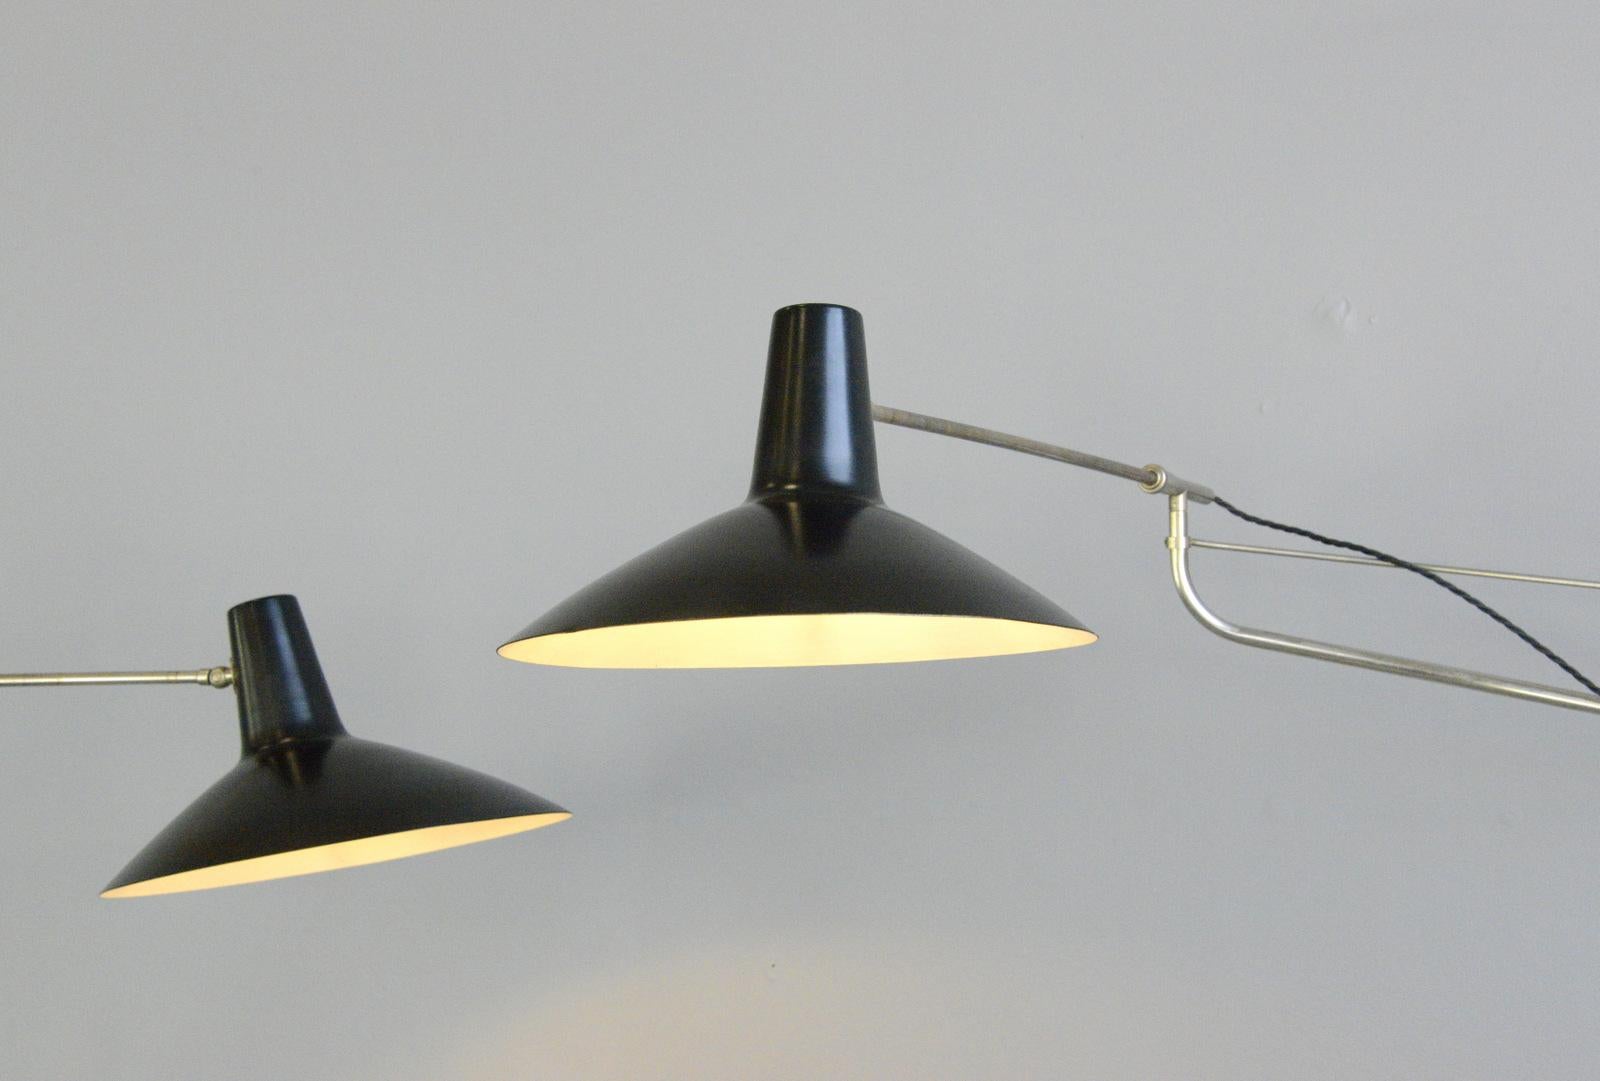 Steel Midcentury Wall Lamps by Artimeta, circa 1950s